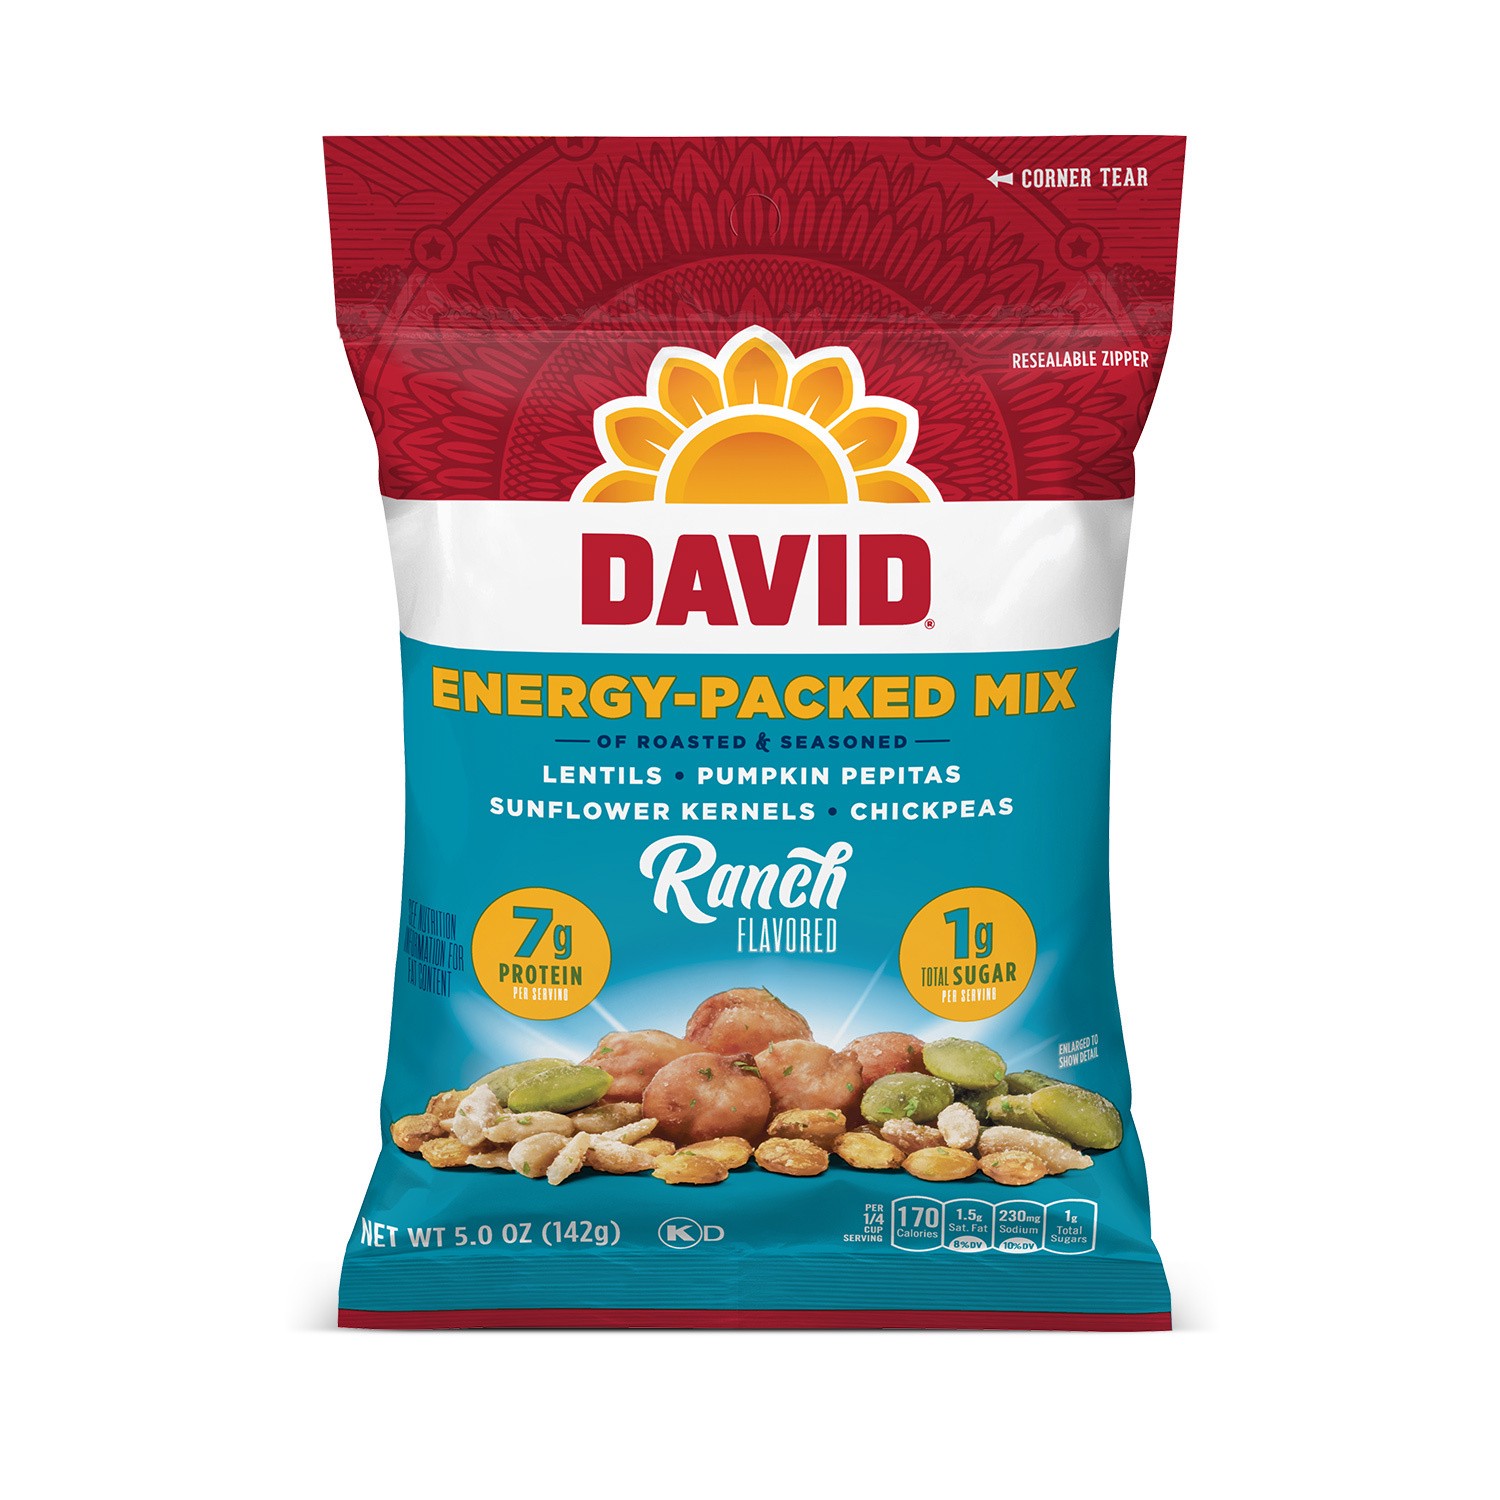 slide 1 of 6, DAVID Ranch Flavored Energy-Packed Mix 5.0 oz, 5 oz